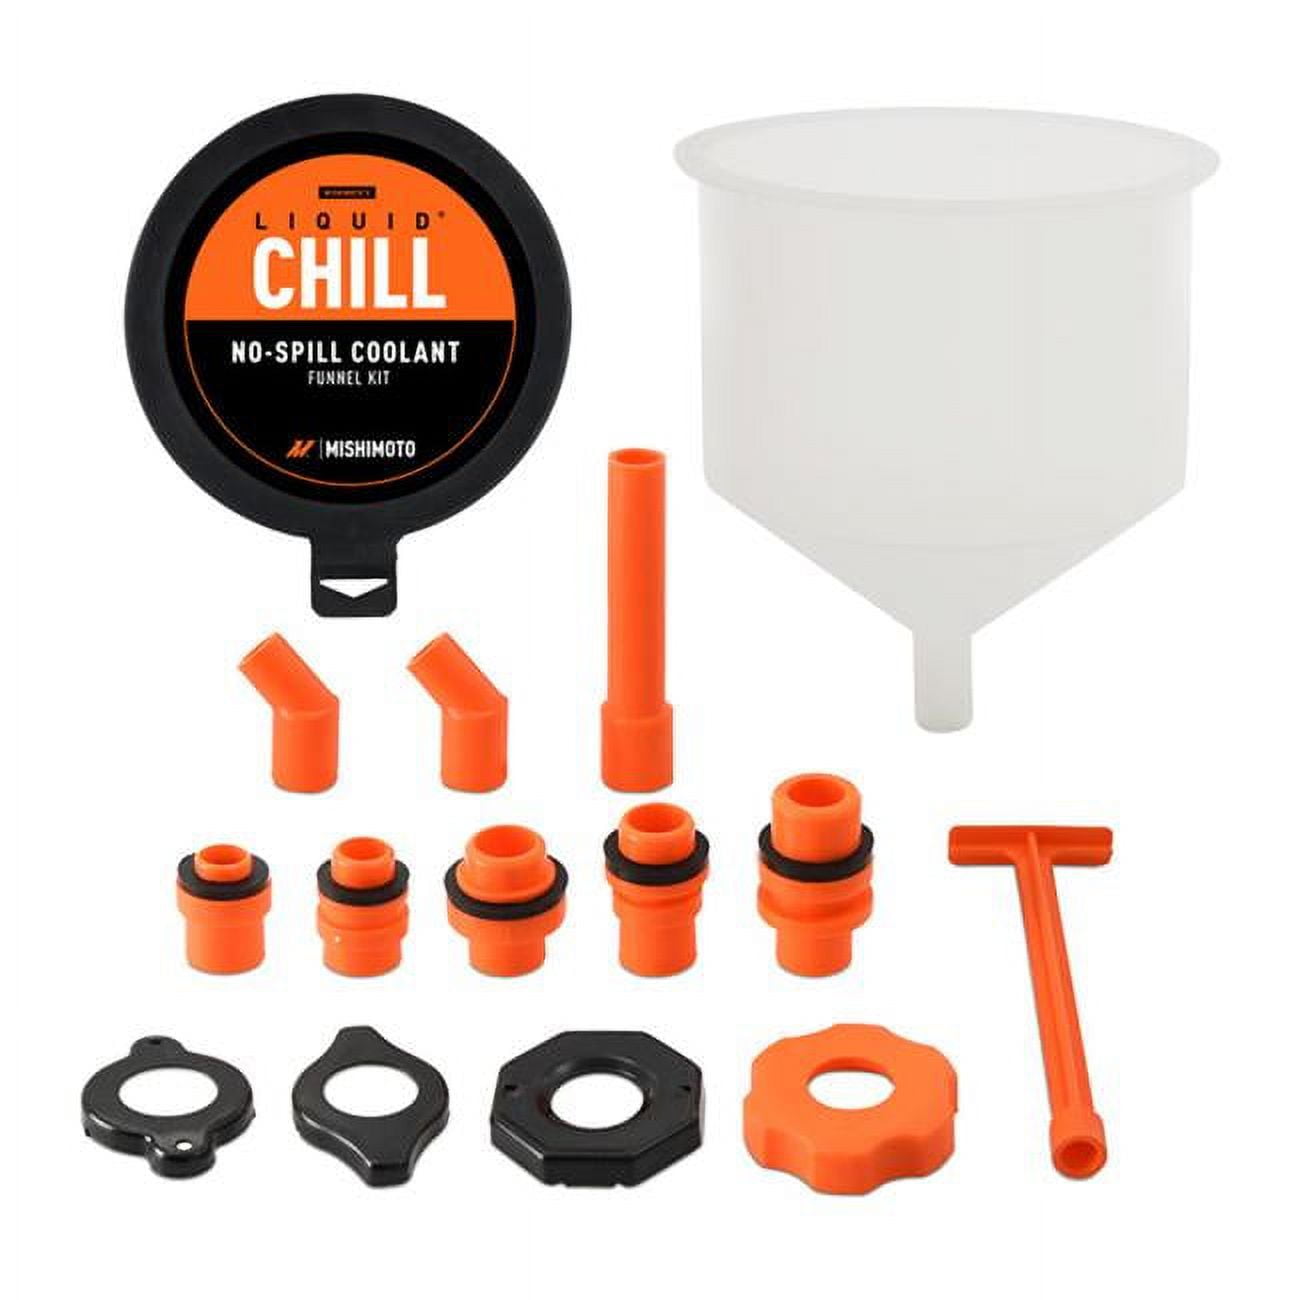 15-Piece No-Spill Coolant Funnel Kit with Valve Switch, Radiator Bleeder Funnel  Kit, Universal Fitment for Vehicle Radiator Refill and Bleeding, SedyOnline